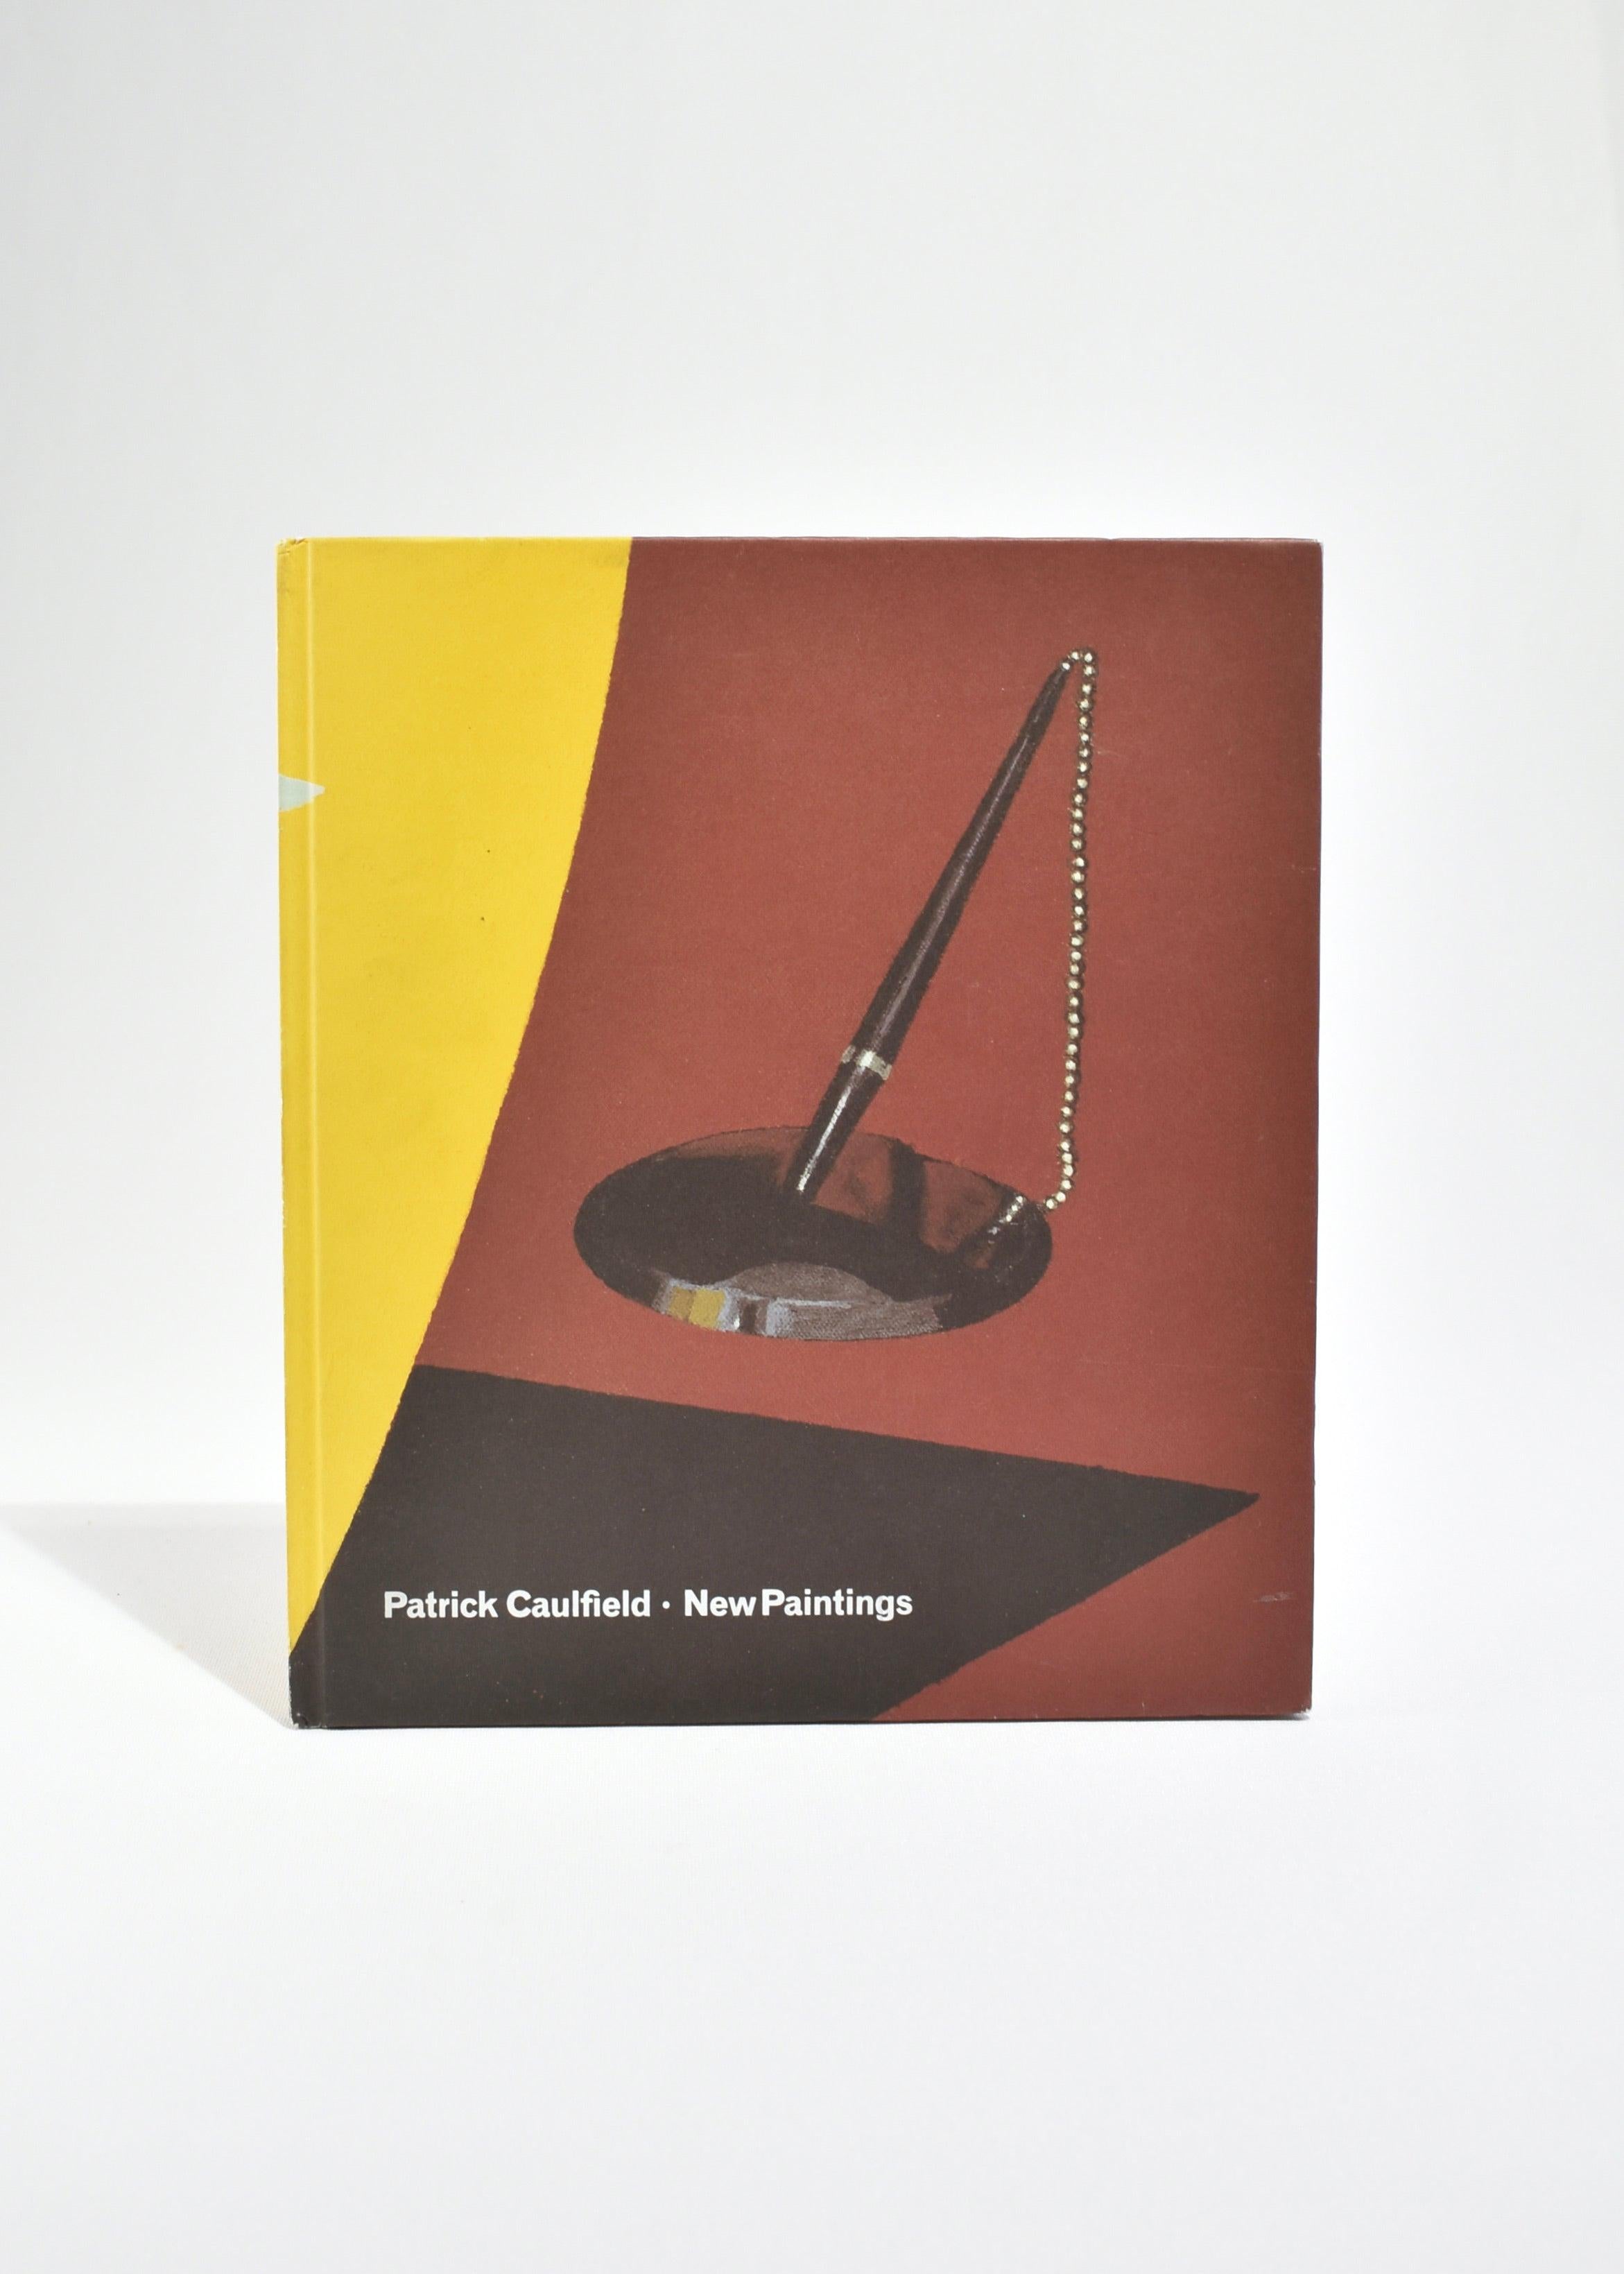 Vintage hardback coffee table book featuring art historical criticism of Patrick Caulfield's paintings. By Waddington Galleries, published in 1997. First edition, 32 pages.

